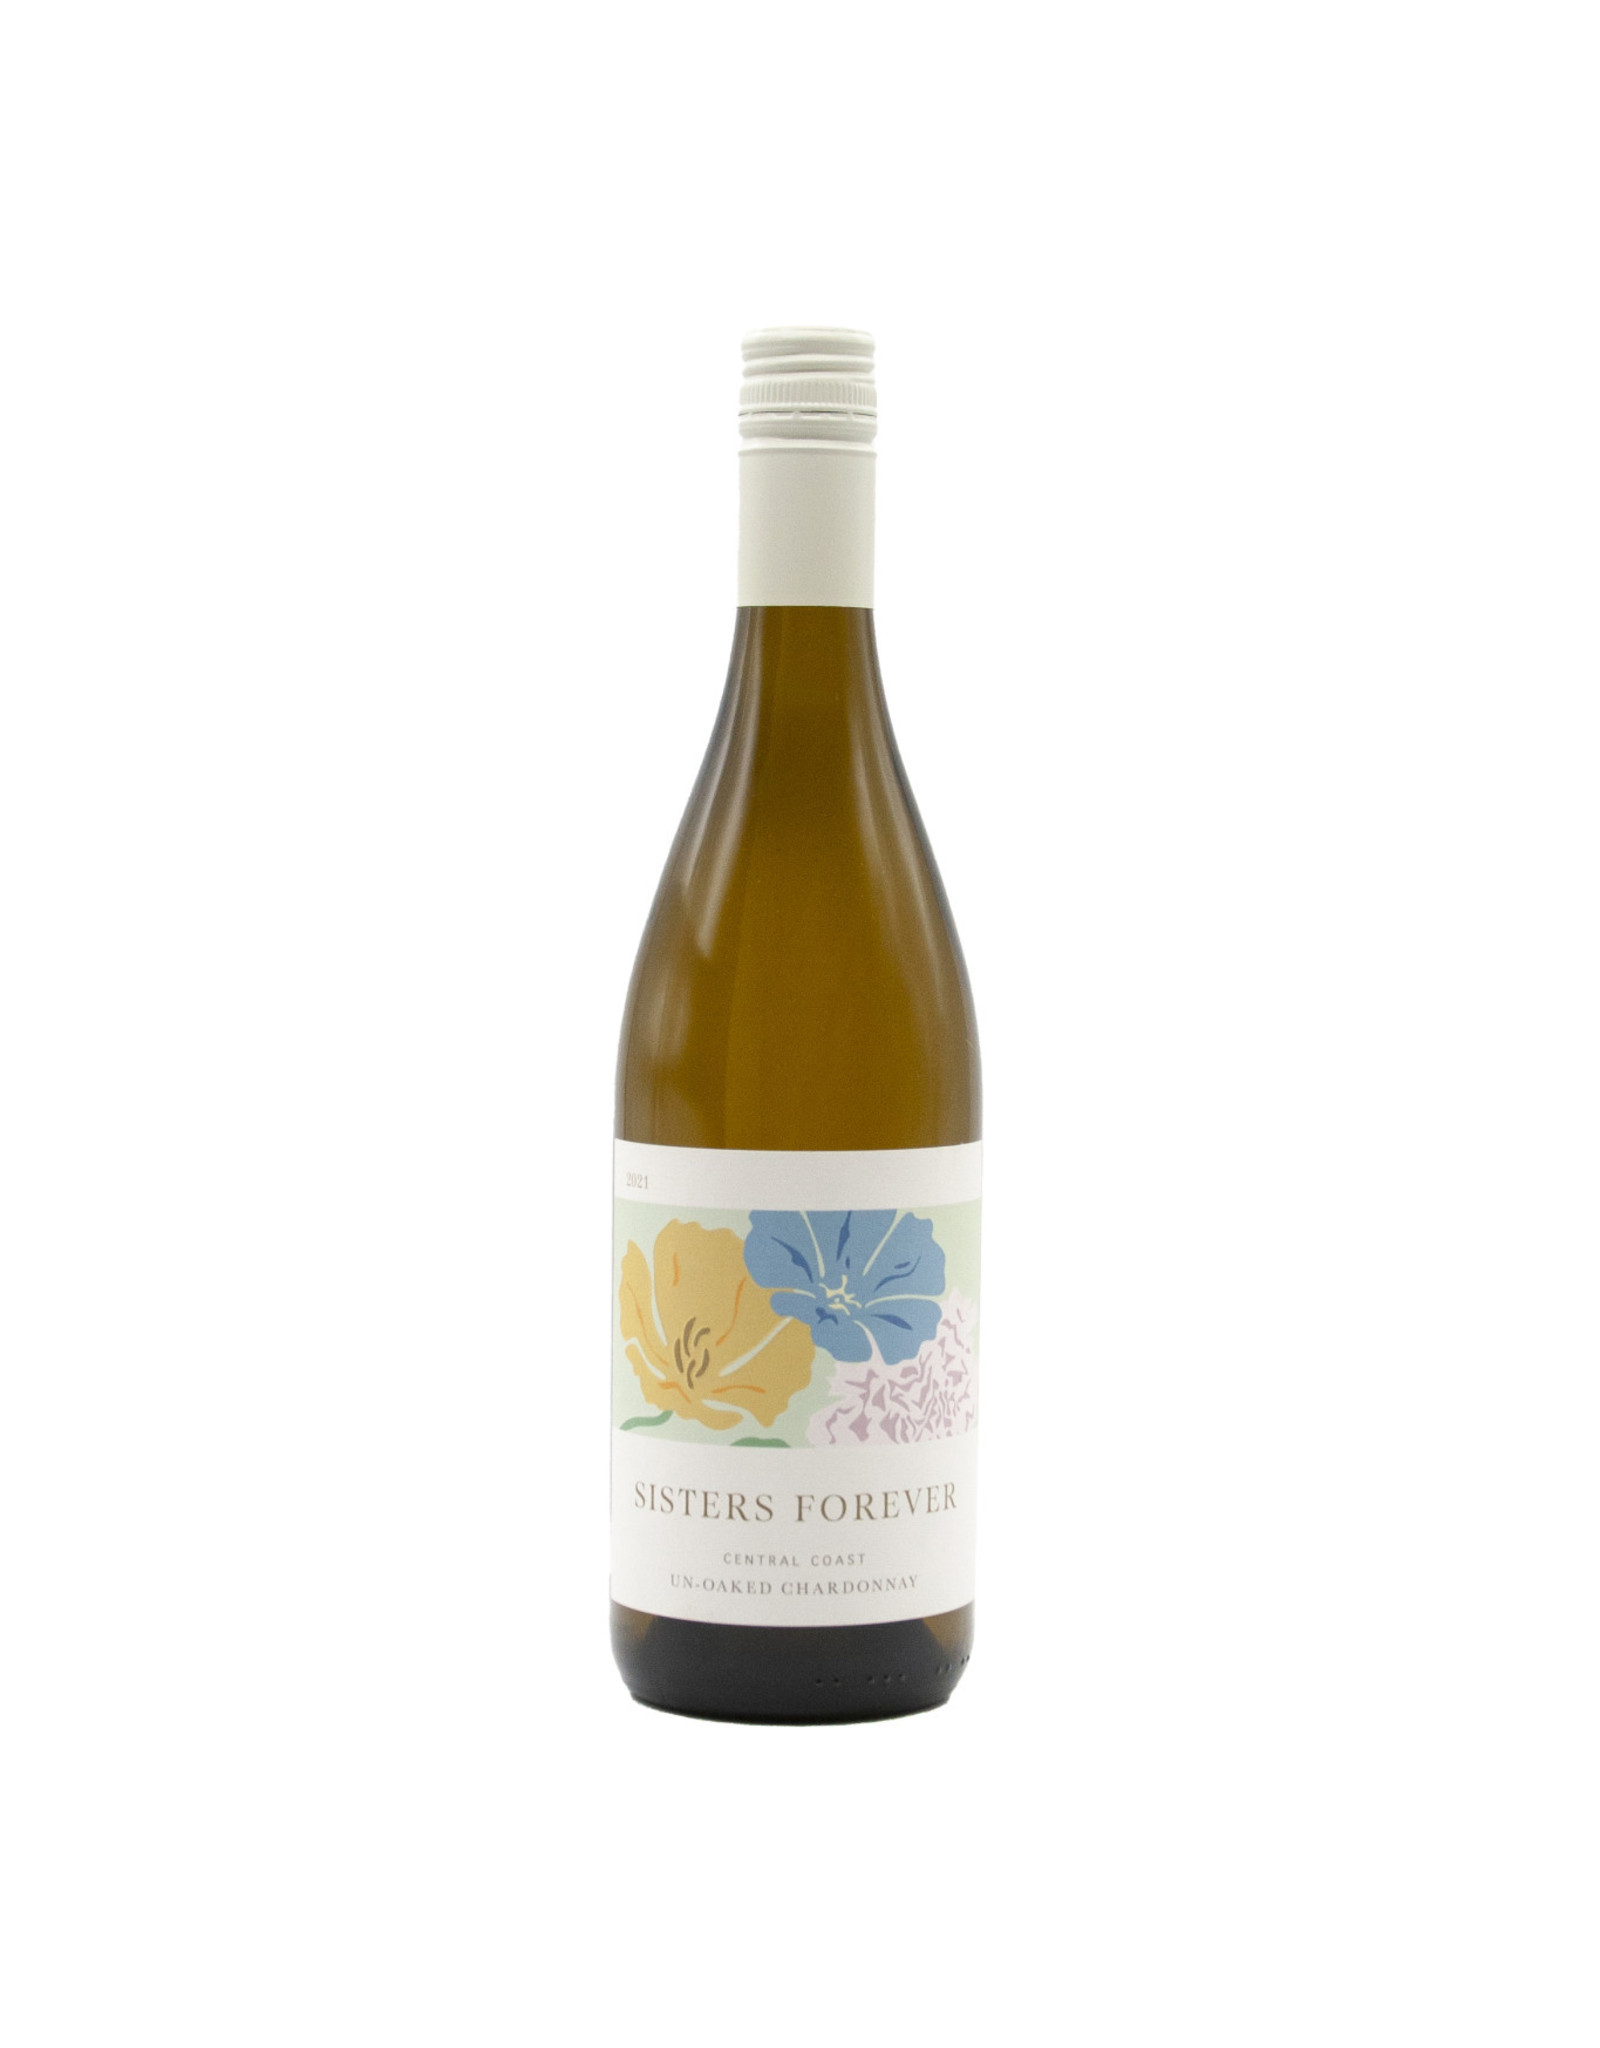 Donati "Sister's Forever" Unoaked Chardonnay